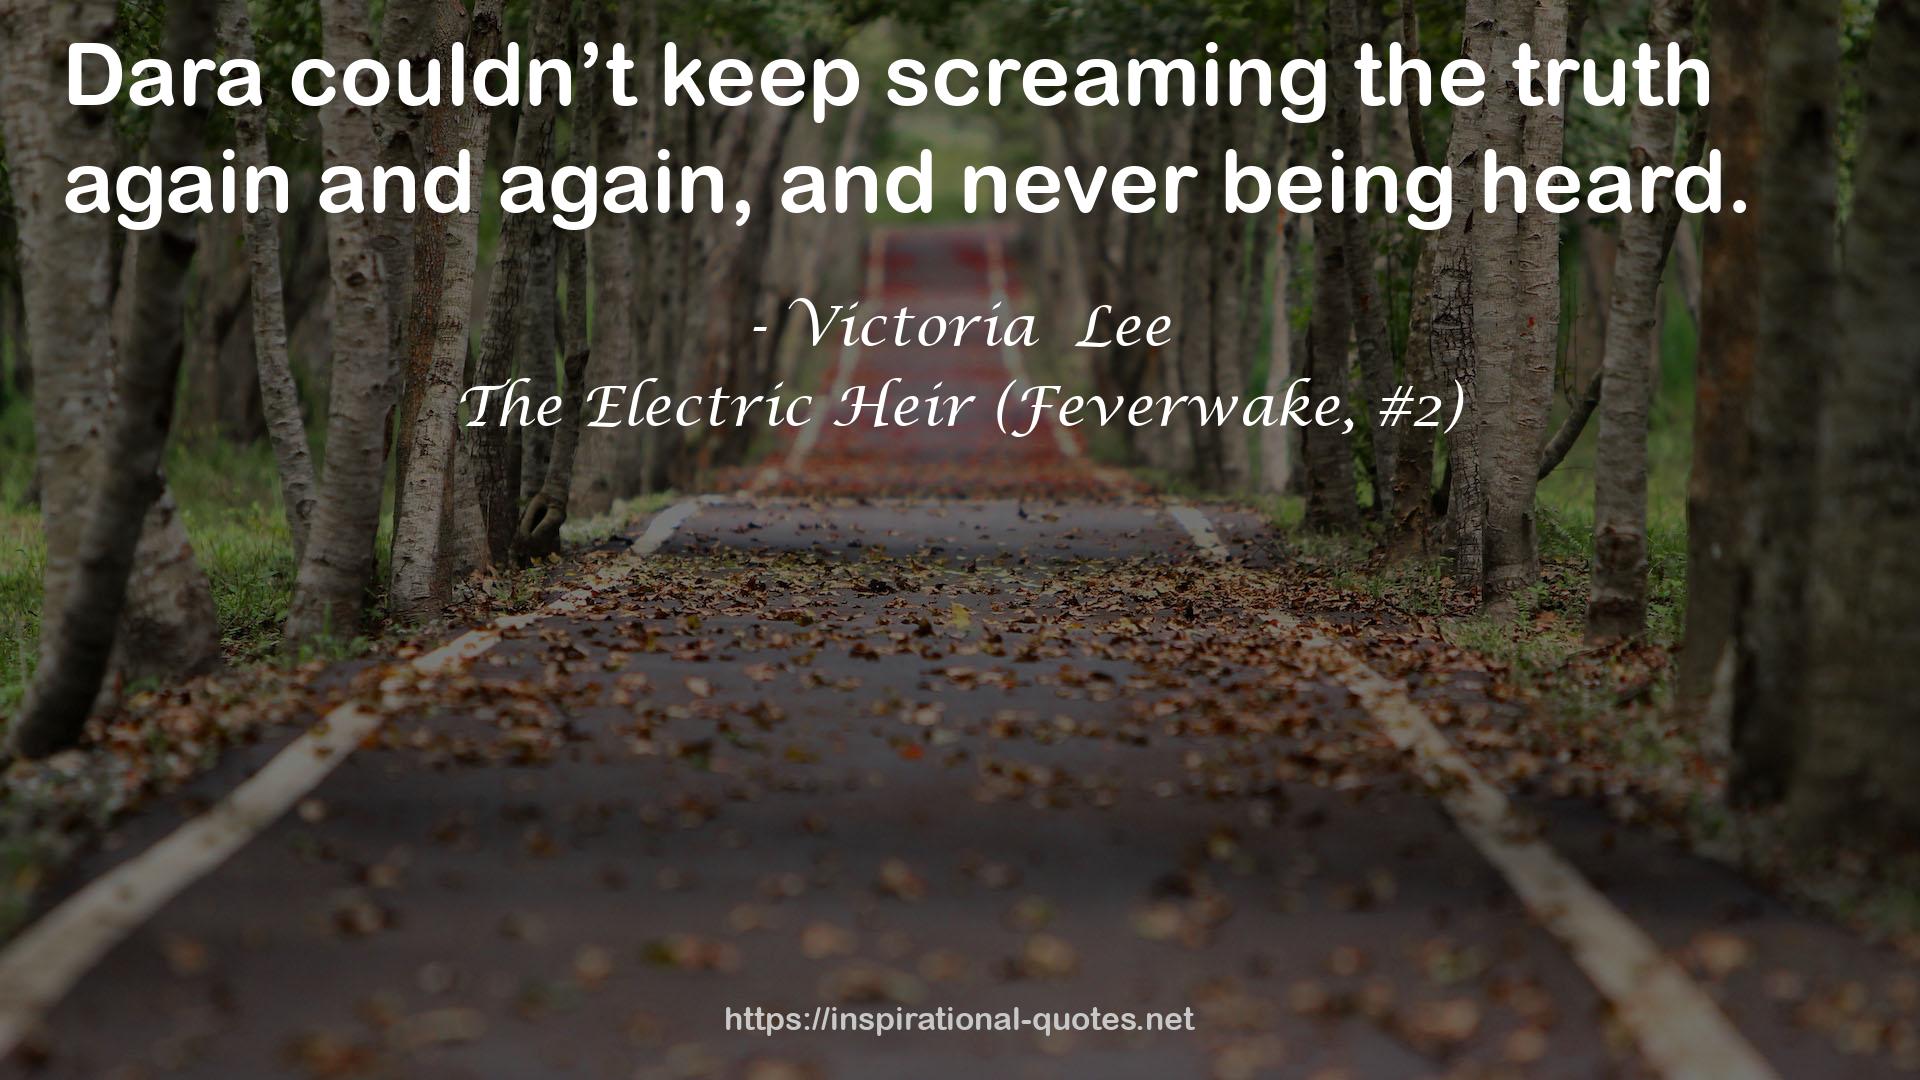 The Electric Heir (Feverwake, #2) QUOTES